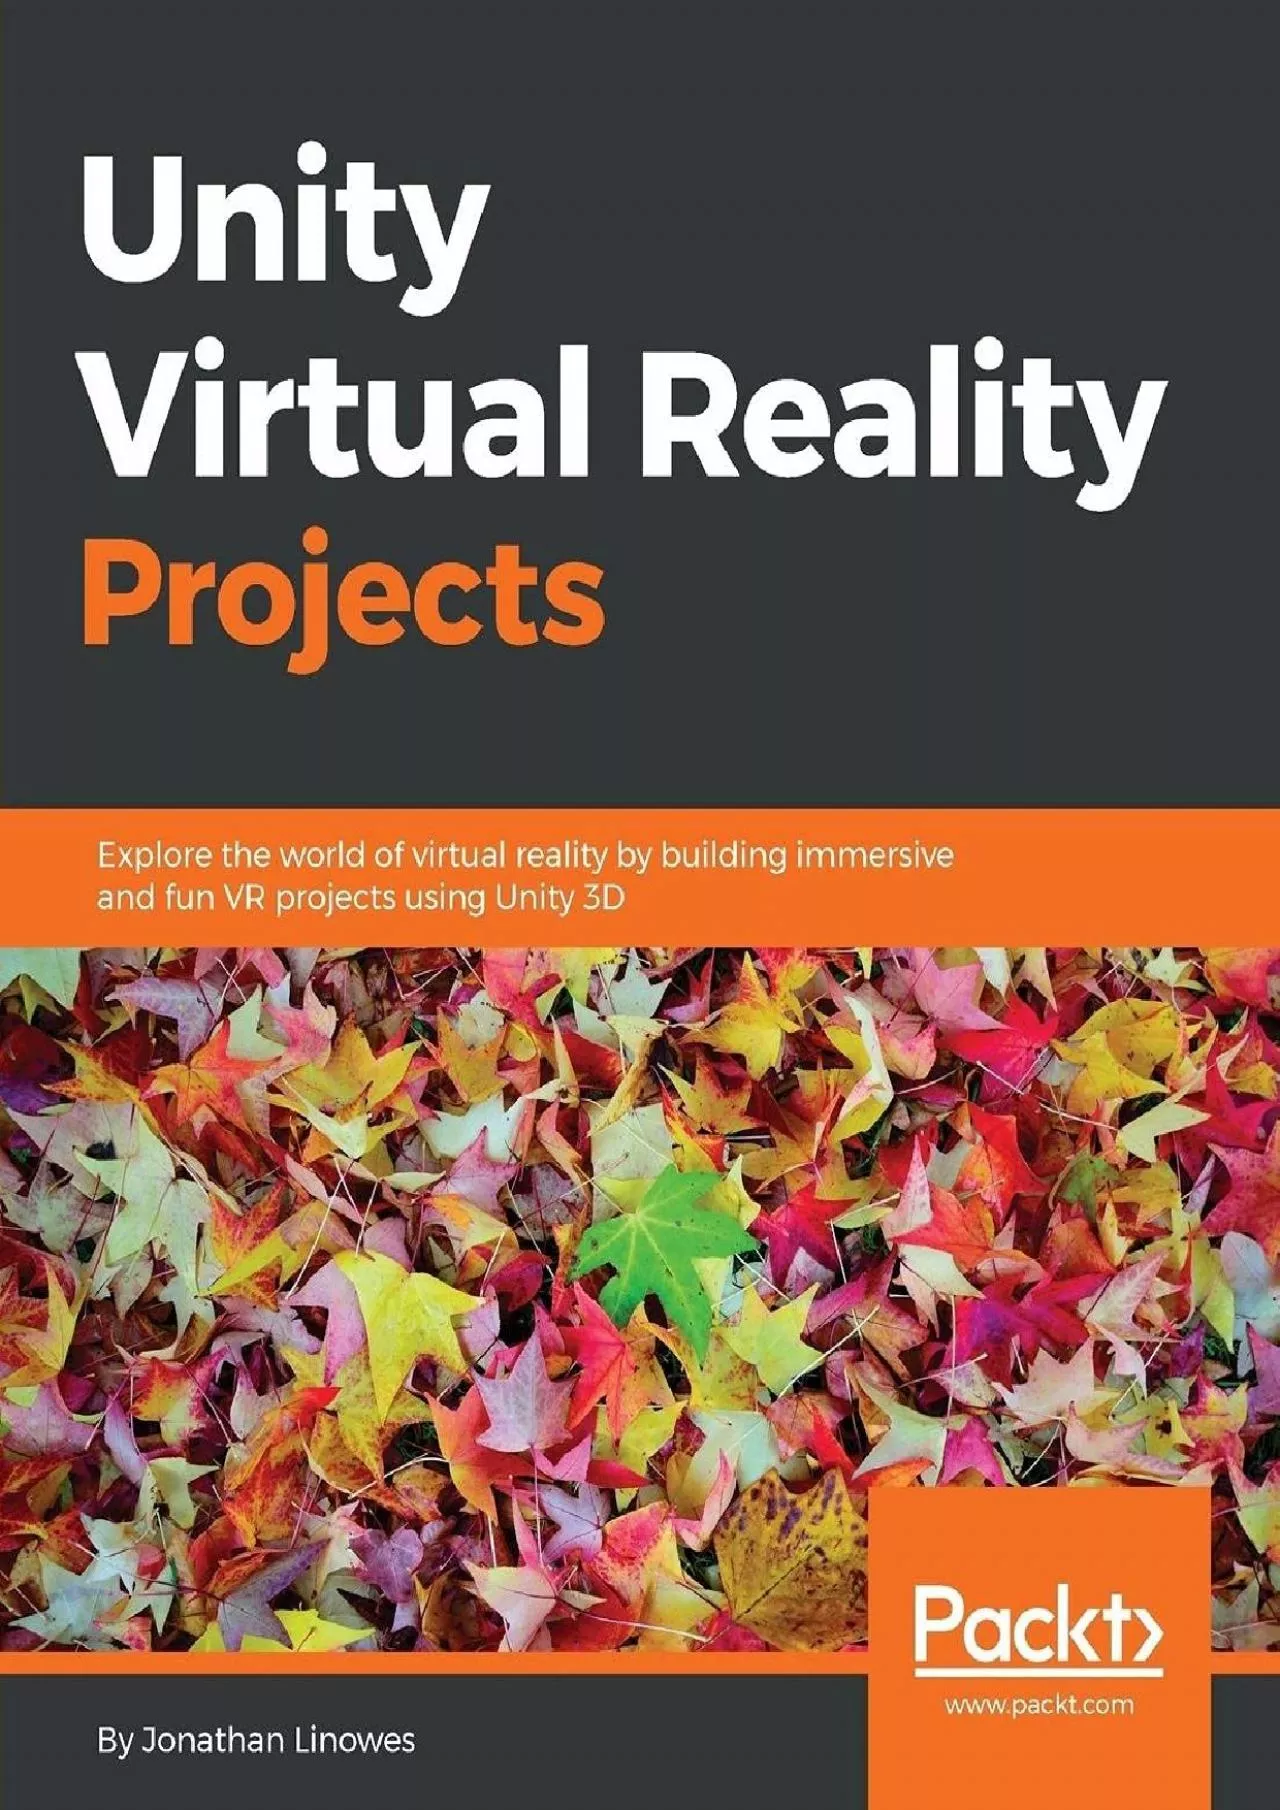 [eBOOK]-Unity Virtual Reality Projects: Explore the world of virtual reality by building